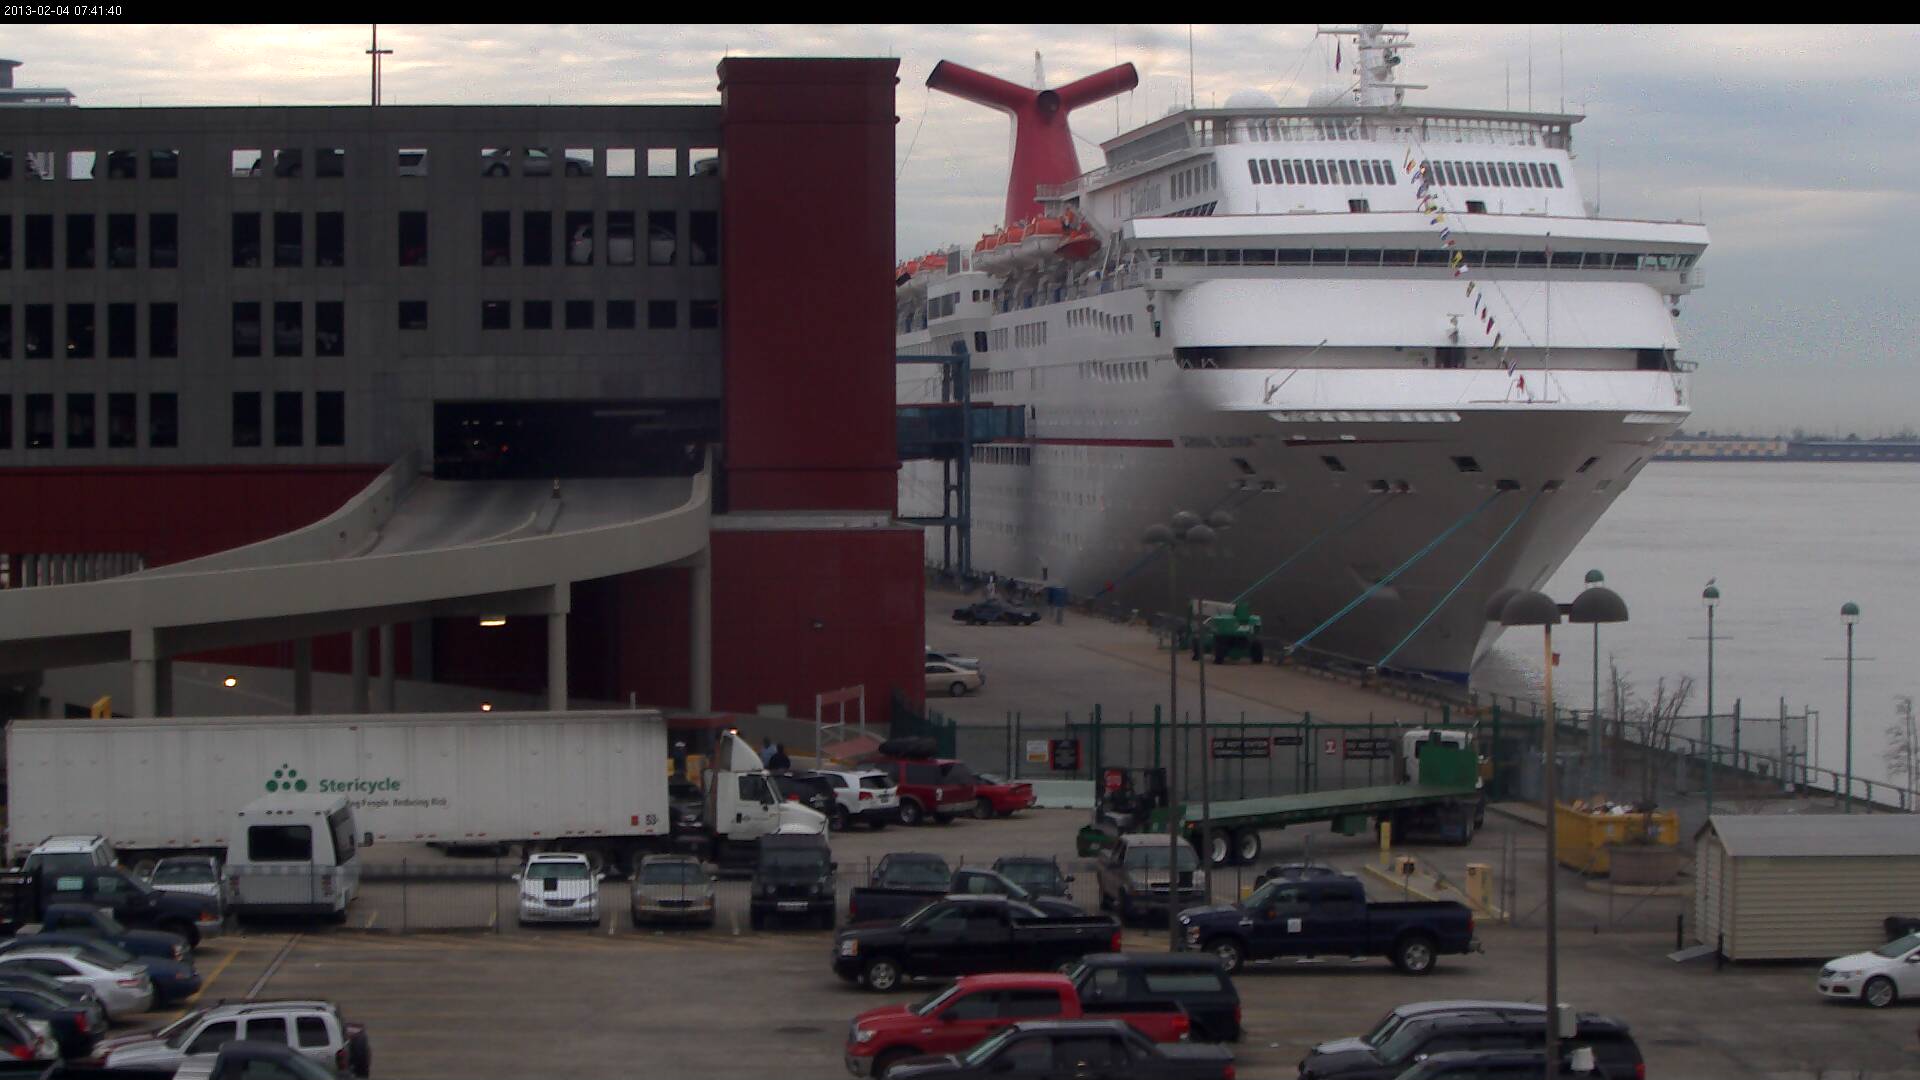 002: Carnival Elation, New Orleans, LA, our ship has come in!